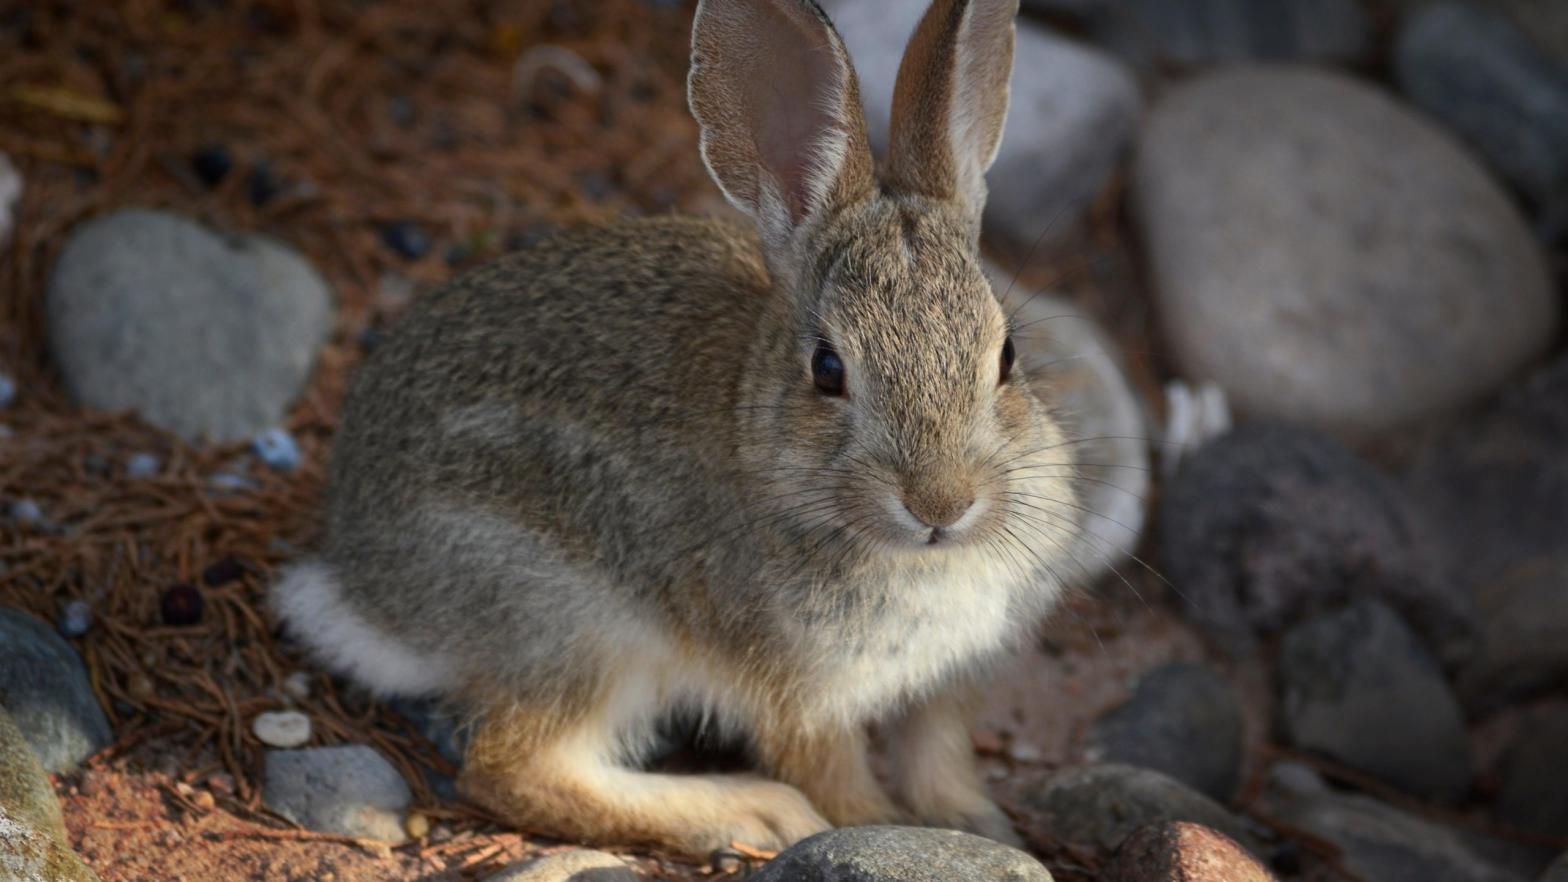 : A young Desert Cottontail rabbit searches for food near Santa Fe, New Mexico. (Photo: Robert Alexander, Getty Images)